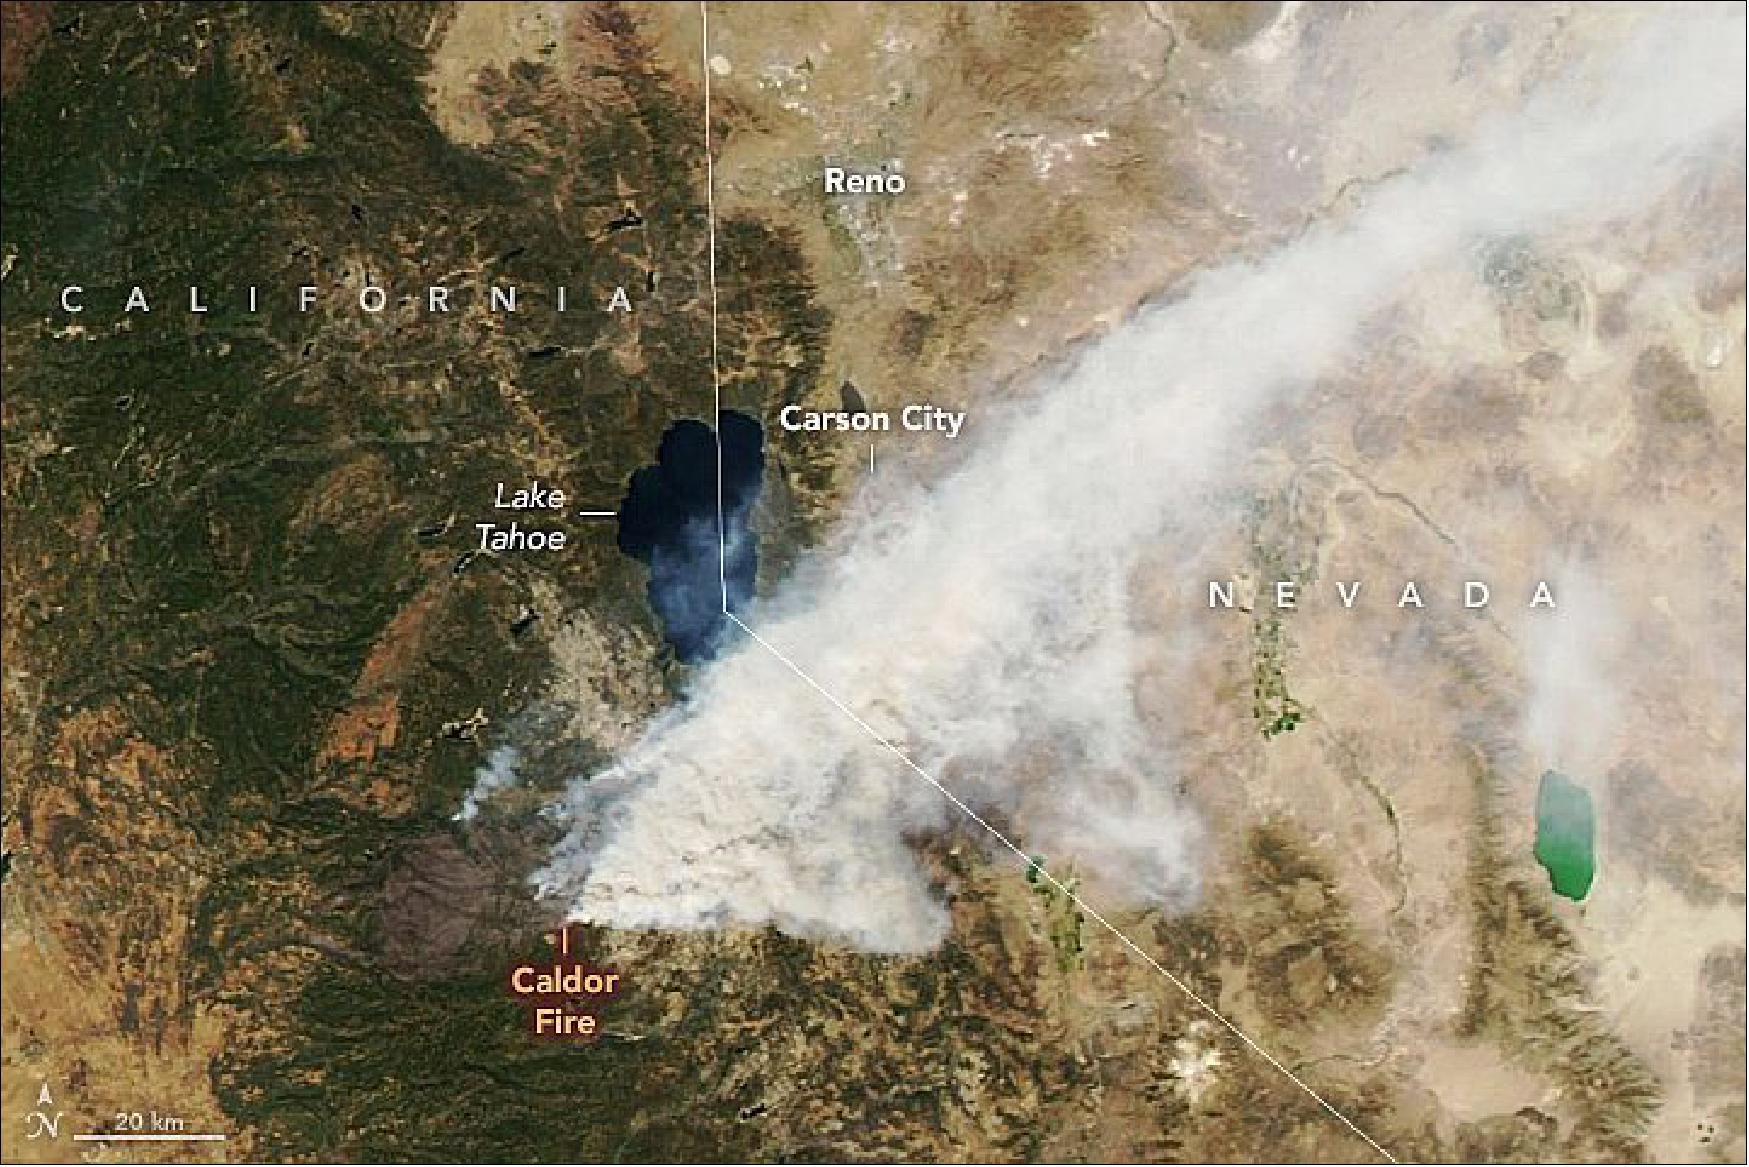 Figure 17: The largest blazes burned in Northern California, most notably the Caldor and Dixie fires, which together have scorched nearly 1 million acres (1,500 square miles) so far. Smoke from the Caldor fire near Lake Tahoe is visible in this image, acquired on the afternoon of August 30, 2021, with the MODIS instrument on NASA’s Aqua satellite. Between ignition on August 14 and the time of the image, the fire had burned more than 170,000 acres. The fire perimeter was 14 percent contained as of August 31 (image credit: NASA Earth Observatory images by Lauren Dauphin, using MODIS data from NASA EOSDIS LANCE and GIBS/Worldview,VIIRS data from NASA EOSDIS LANCE, GIBS/Worldview, and the Suomi National Polar-orbiting Partnership, and Landsat data from the U.S. Geological Survey. Story by Kathryn Hansen)